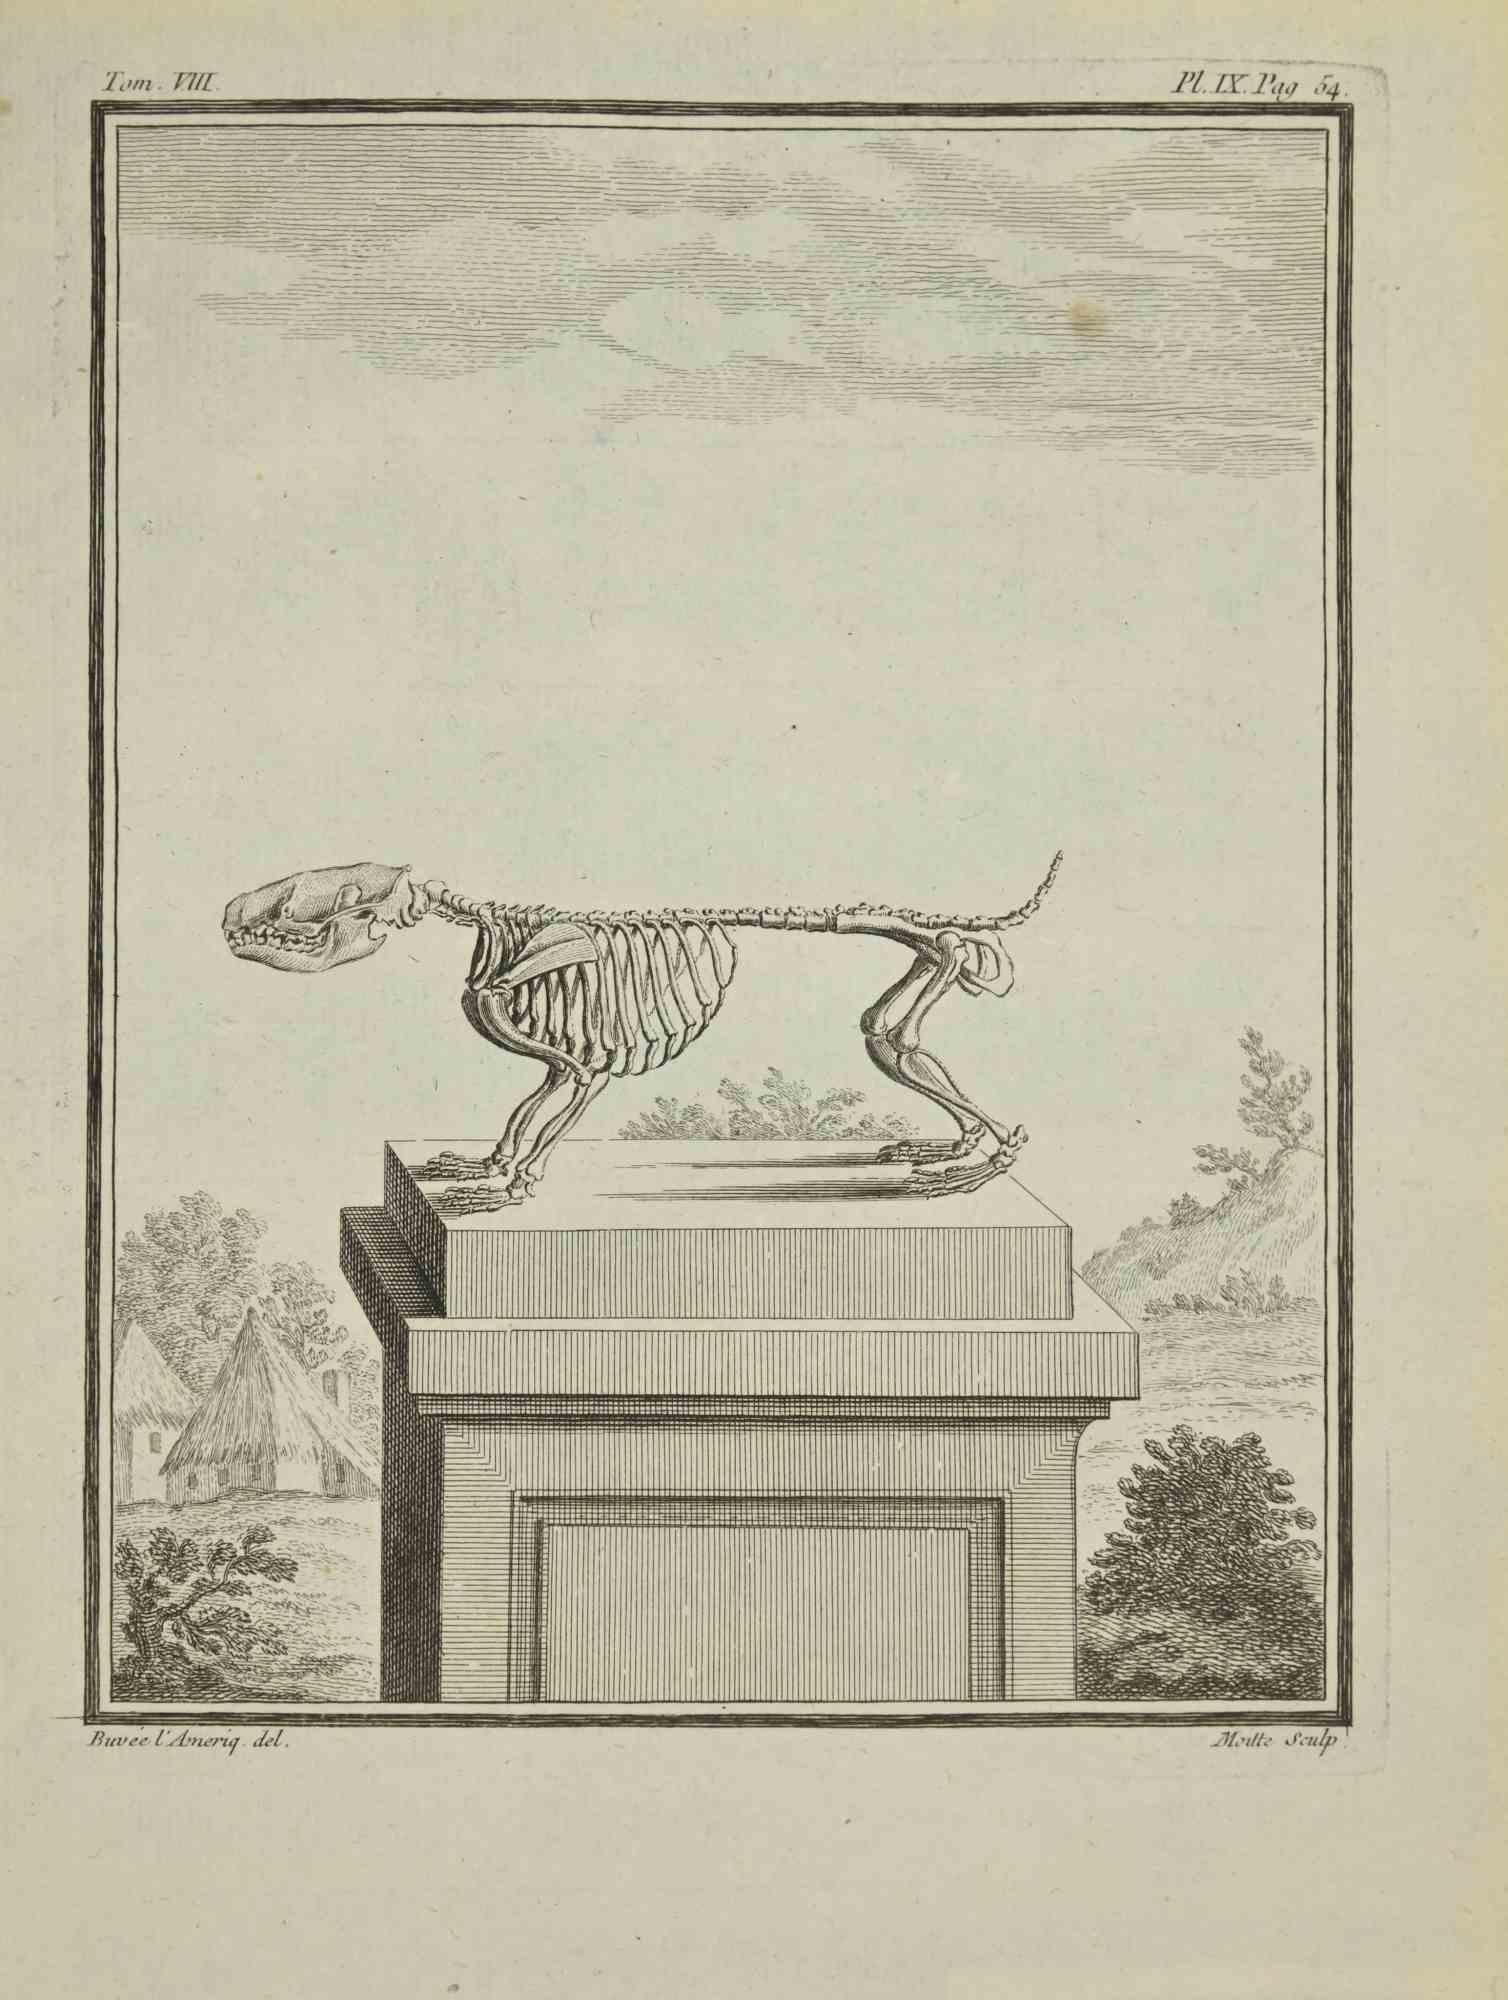 Skeleton - Etching by Jean Gullaume Moitte - 1771